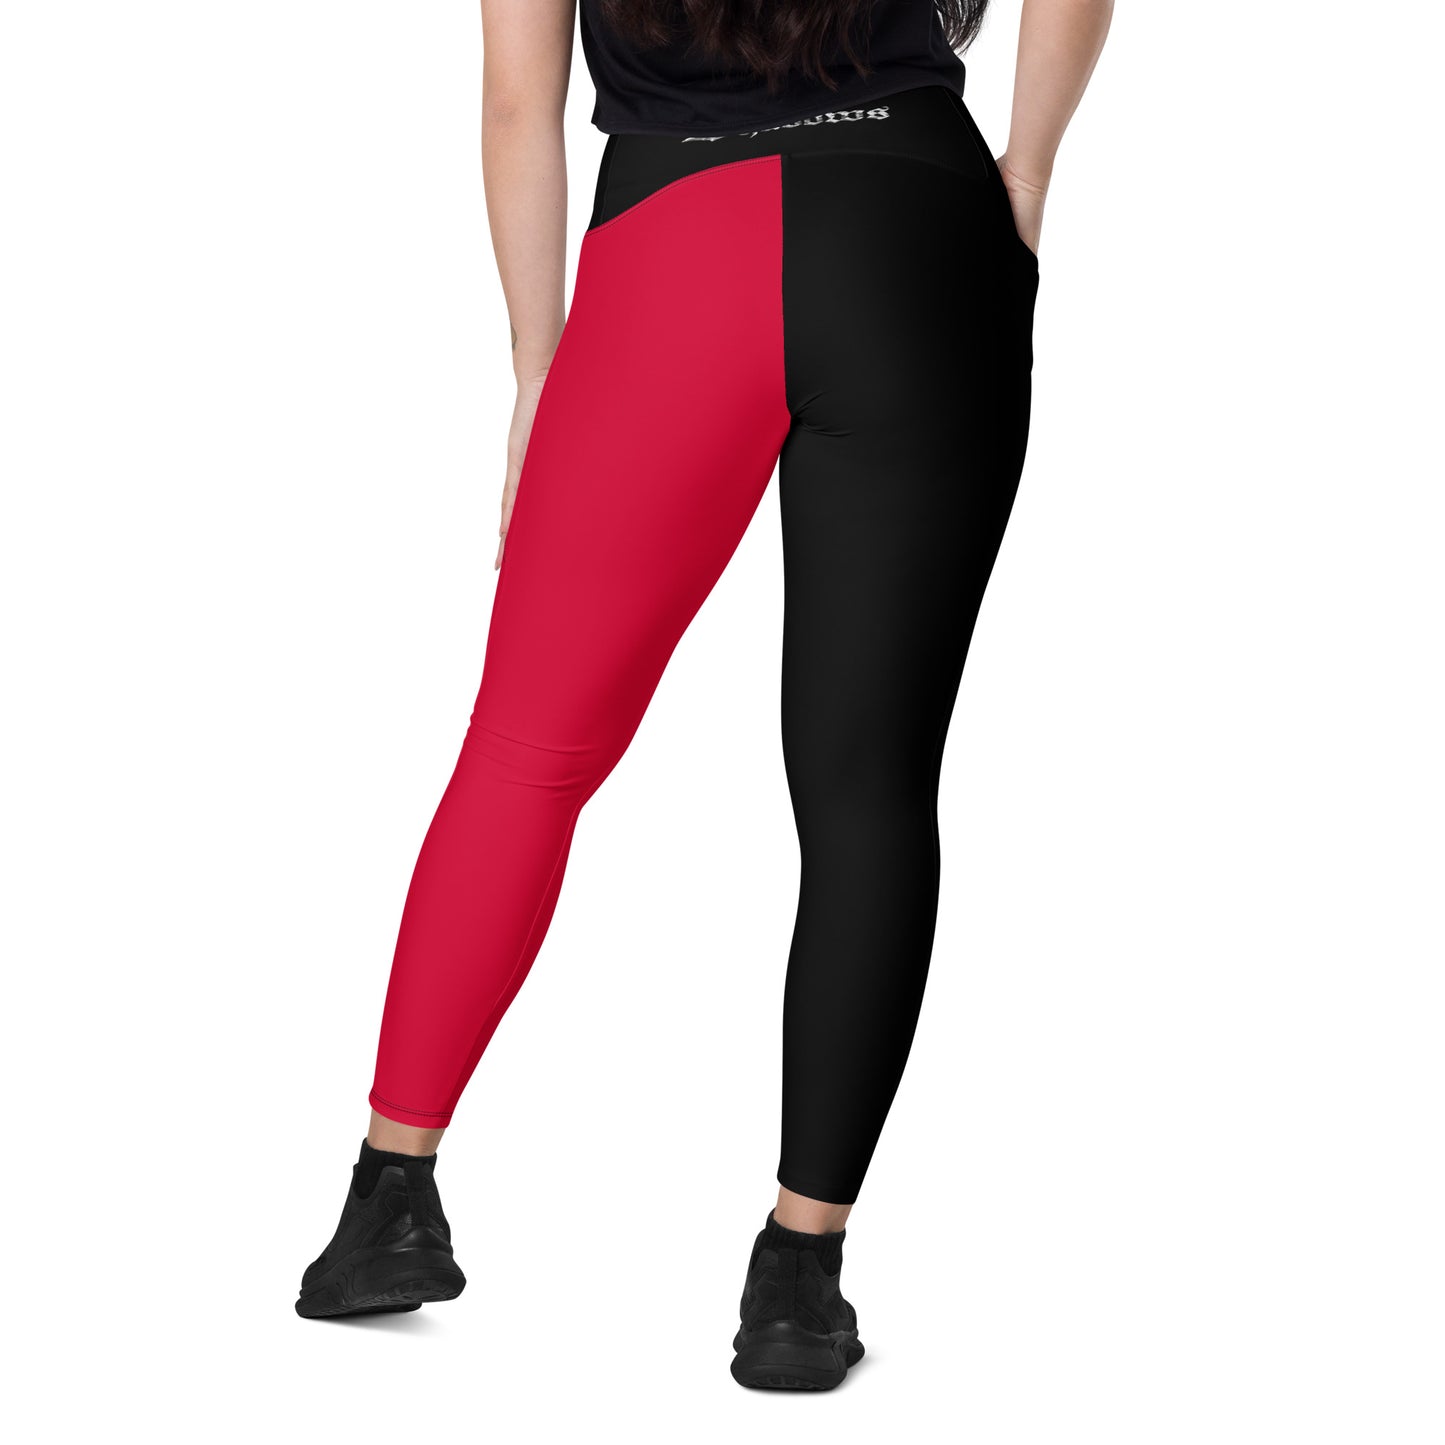 Shadows One leg Leggings with pockets Red